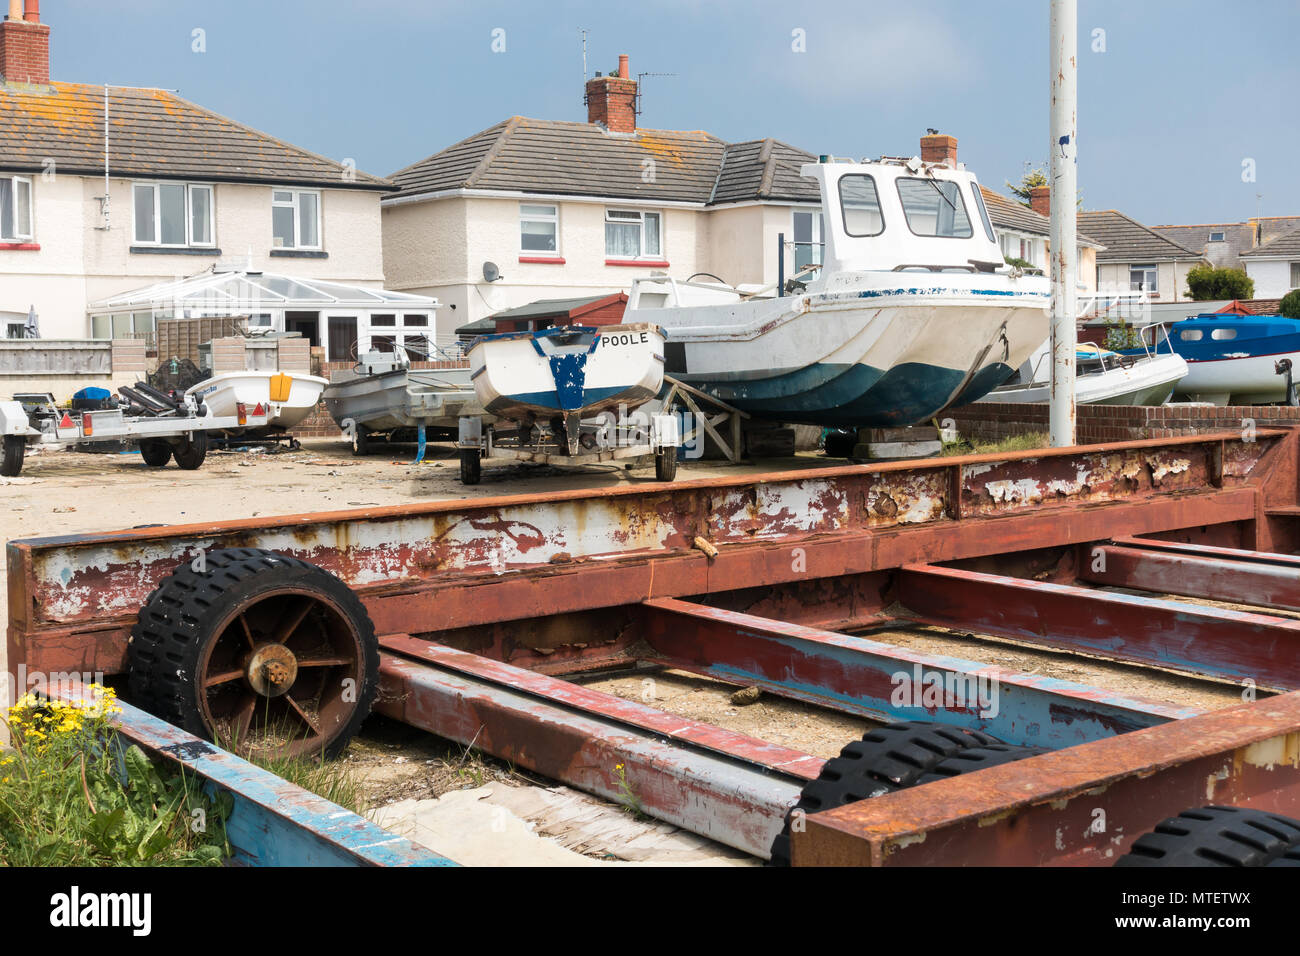 Boats in a yard behind some houses in Poole, Dorset, United Kingdom Stock Photo